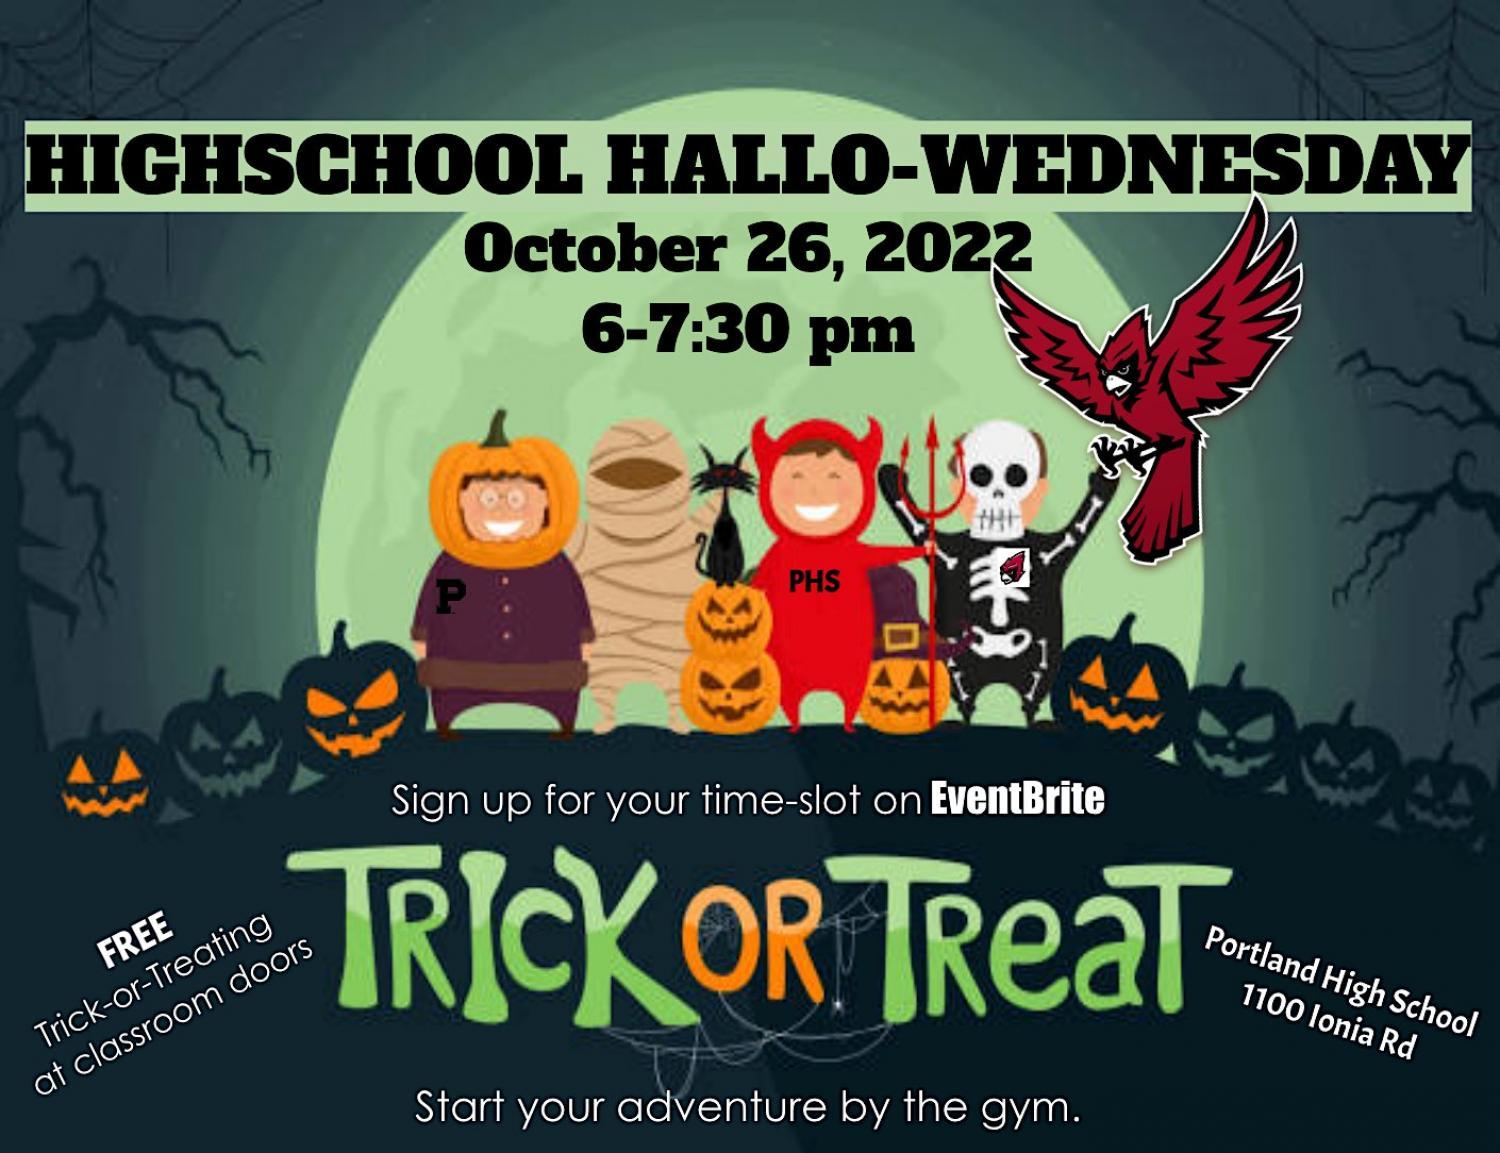 Portland High School - Halloween Trick or Treating
Wed Oct 26, 6:00 PM - Wed Oct 26, 7:30 PM
in 6 days